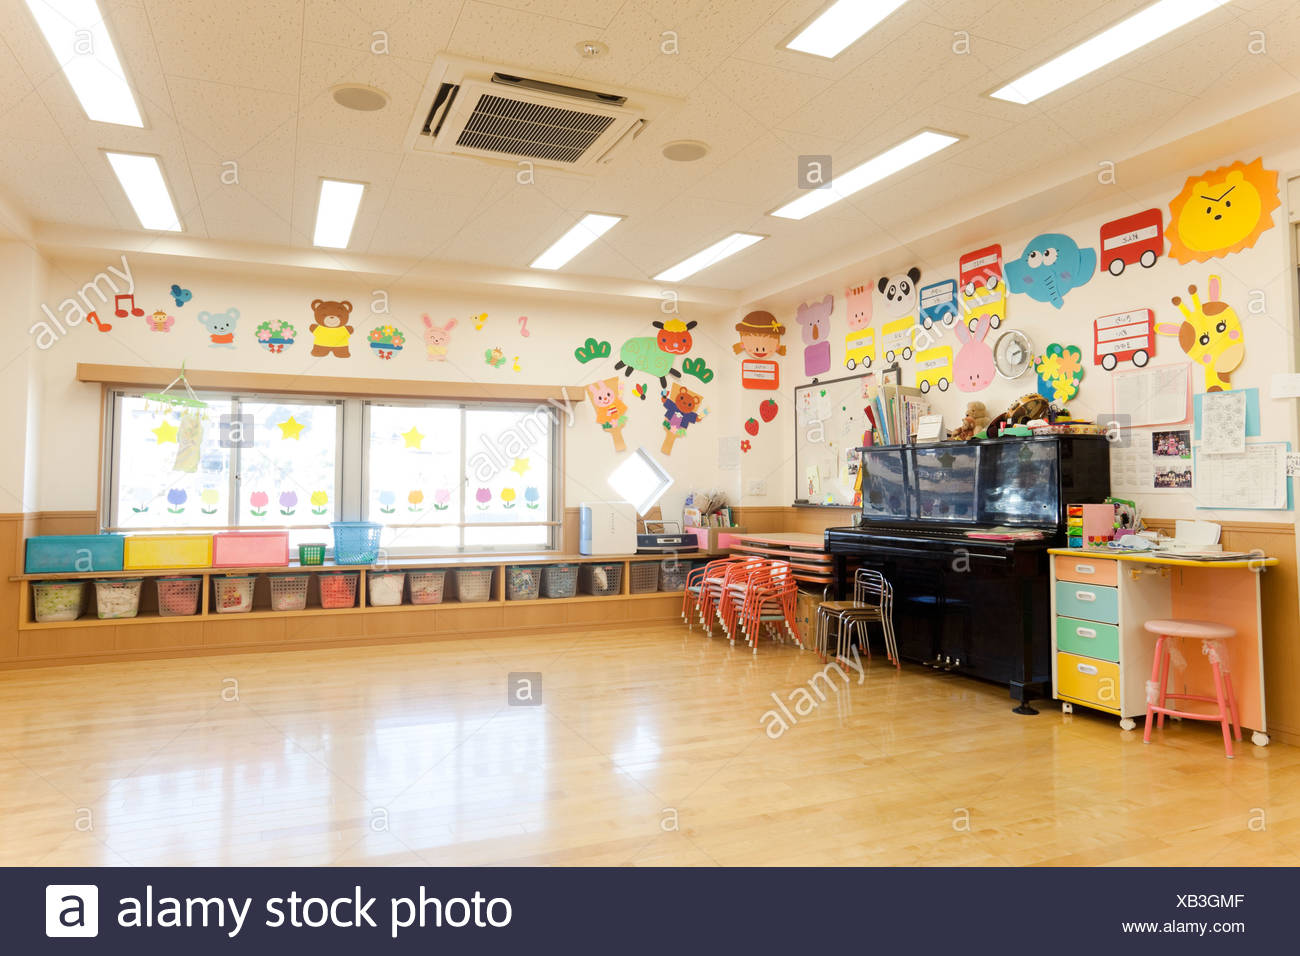 Room Of Day Care Center For Children Stock Photo 282206079 Alamy